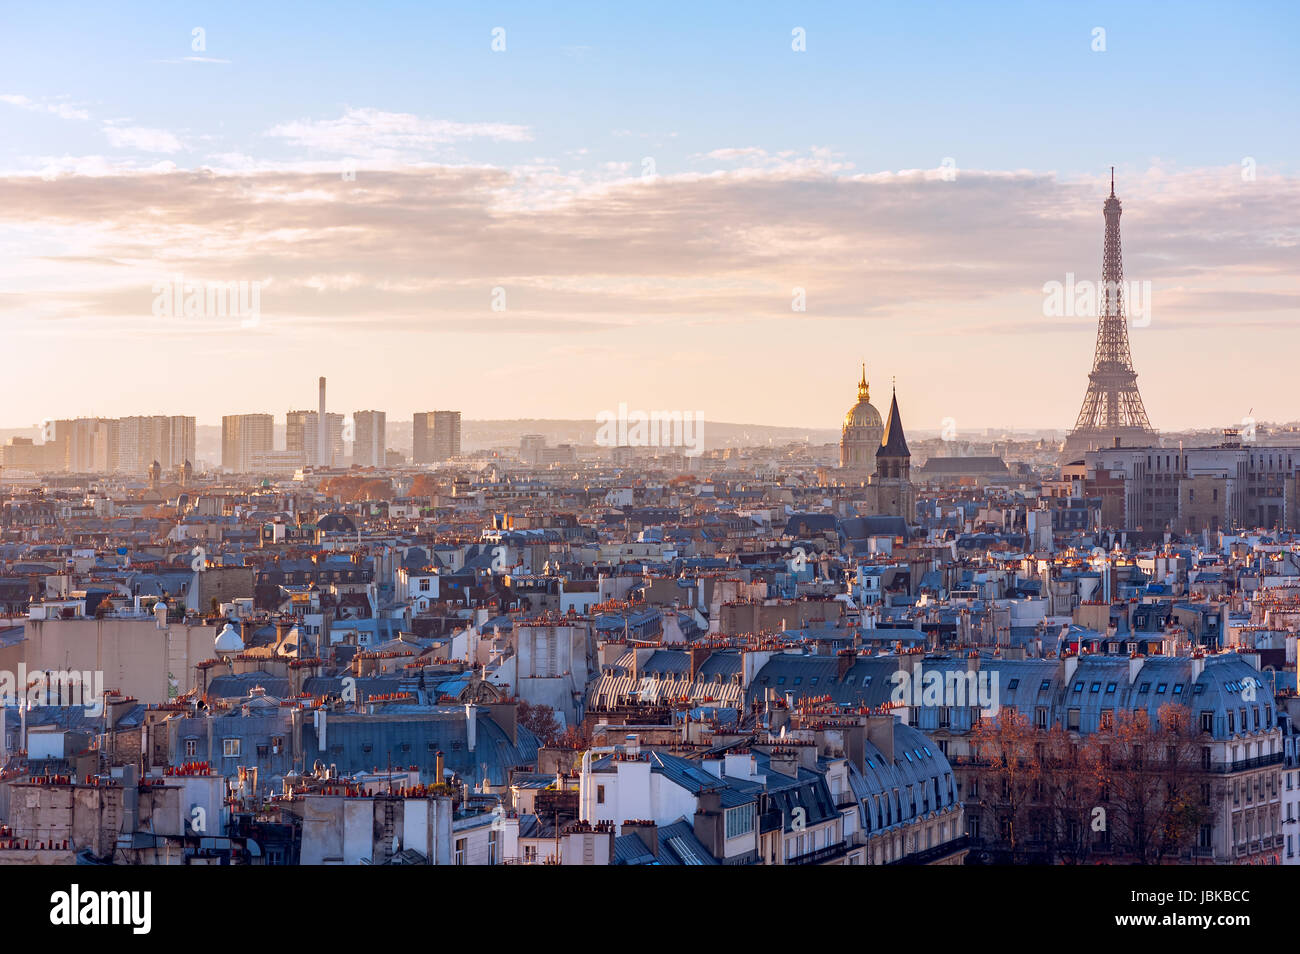 Paris skyline with eiffel tower at sunset, France Stock Photo